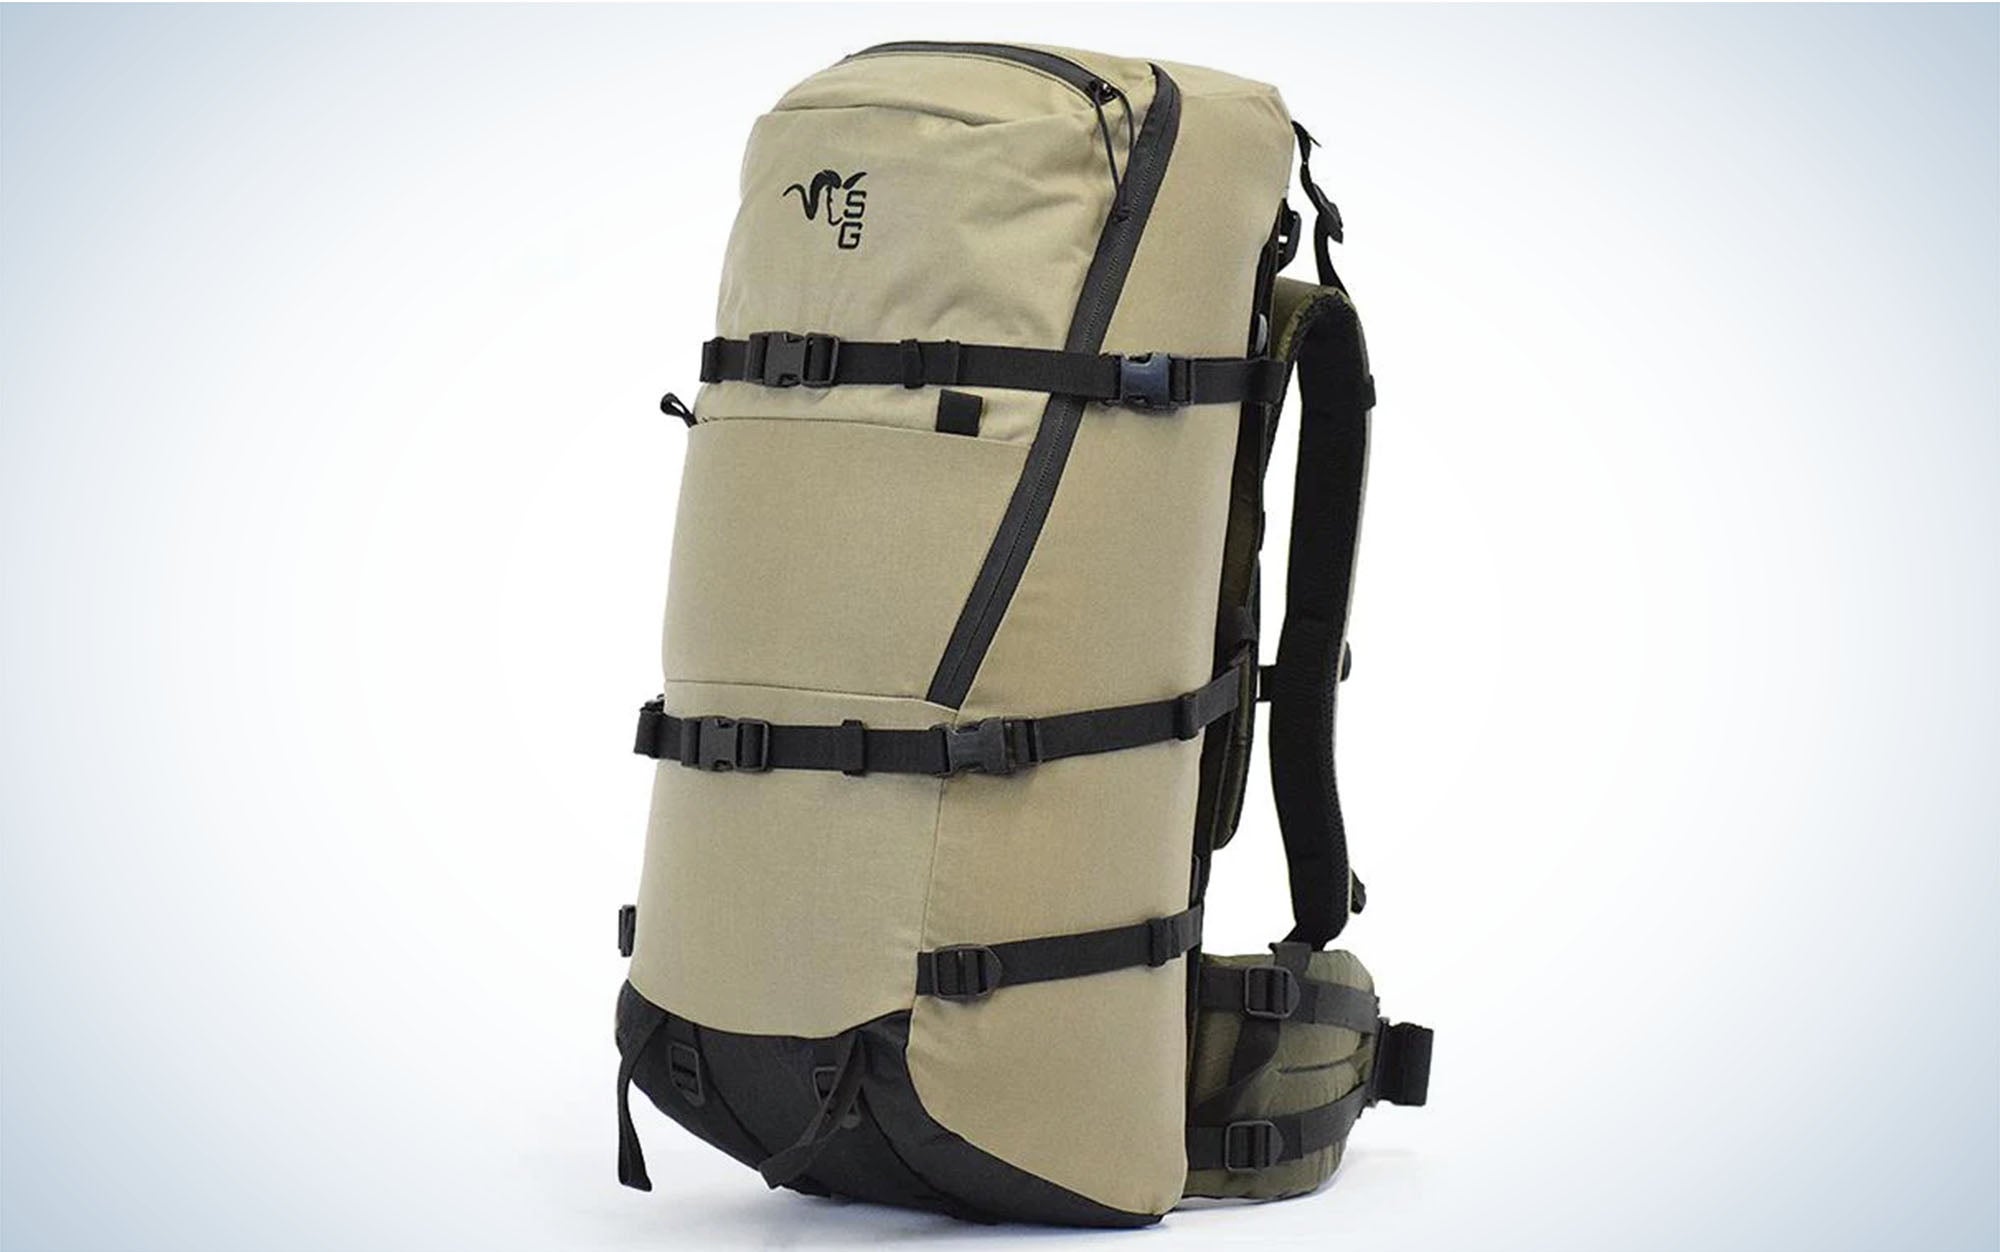 The Stone Glacier Evo is the best hunting backpack for short overnights.